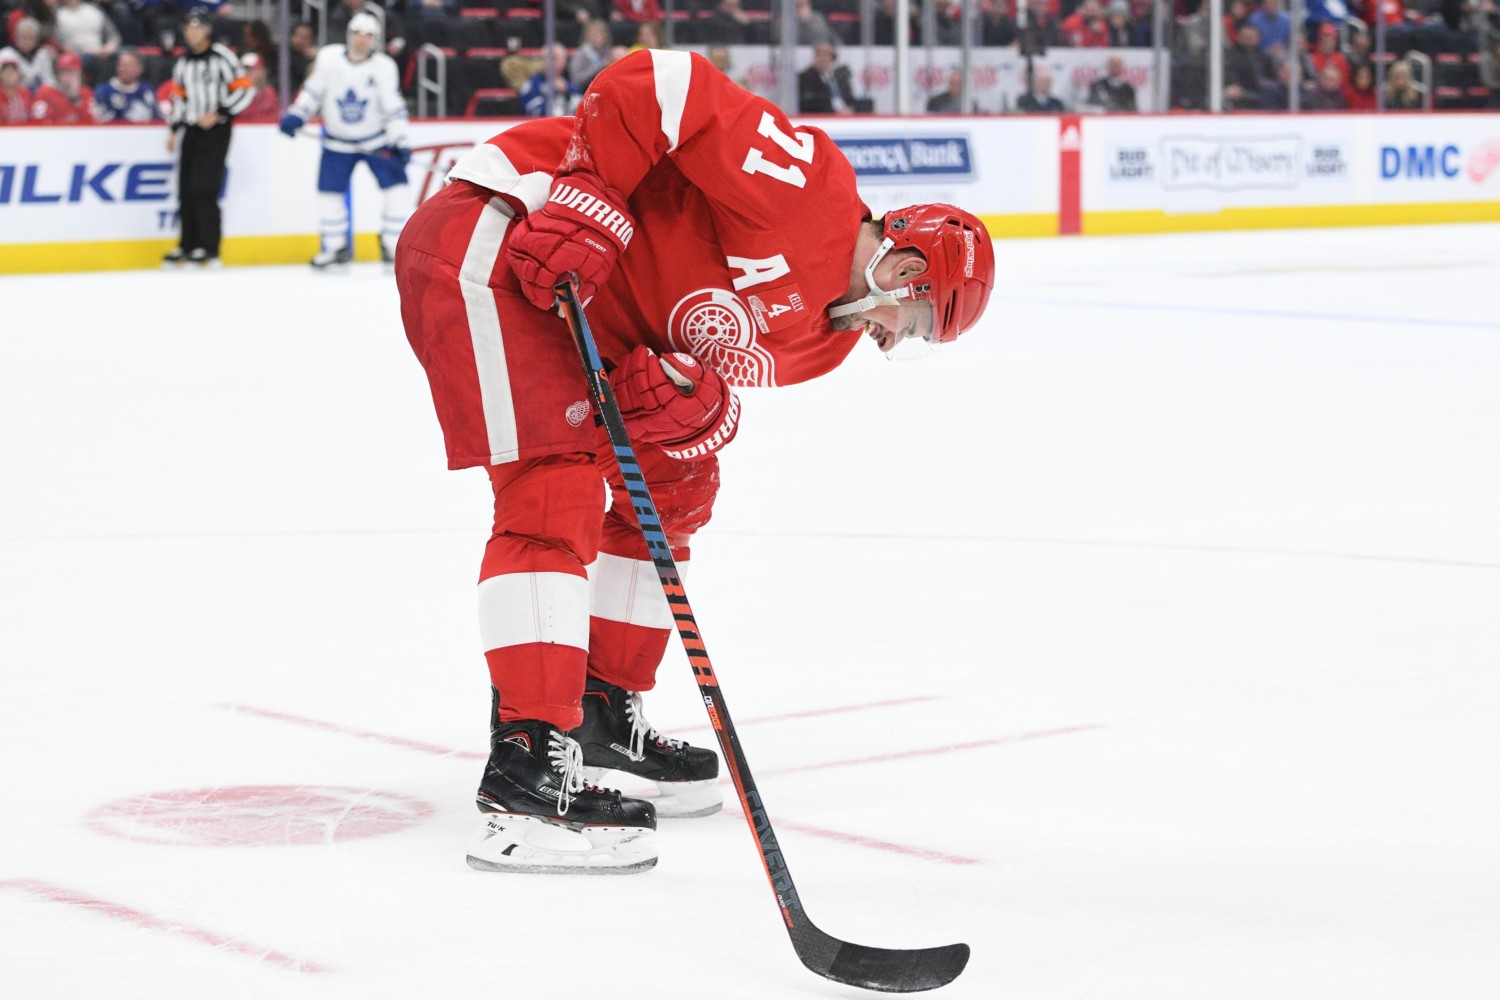 Dylan Larkin expected to play tonight.